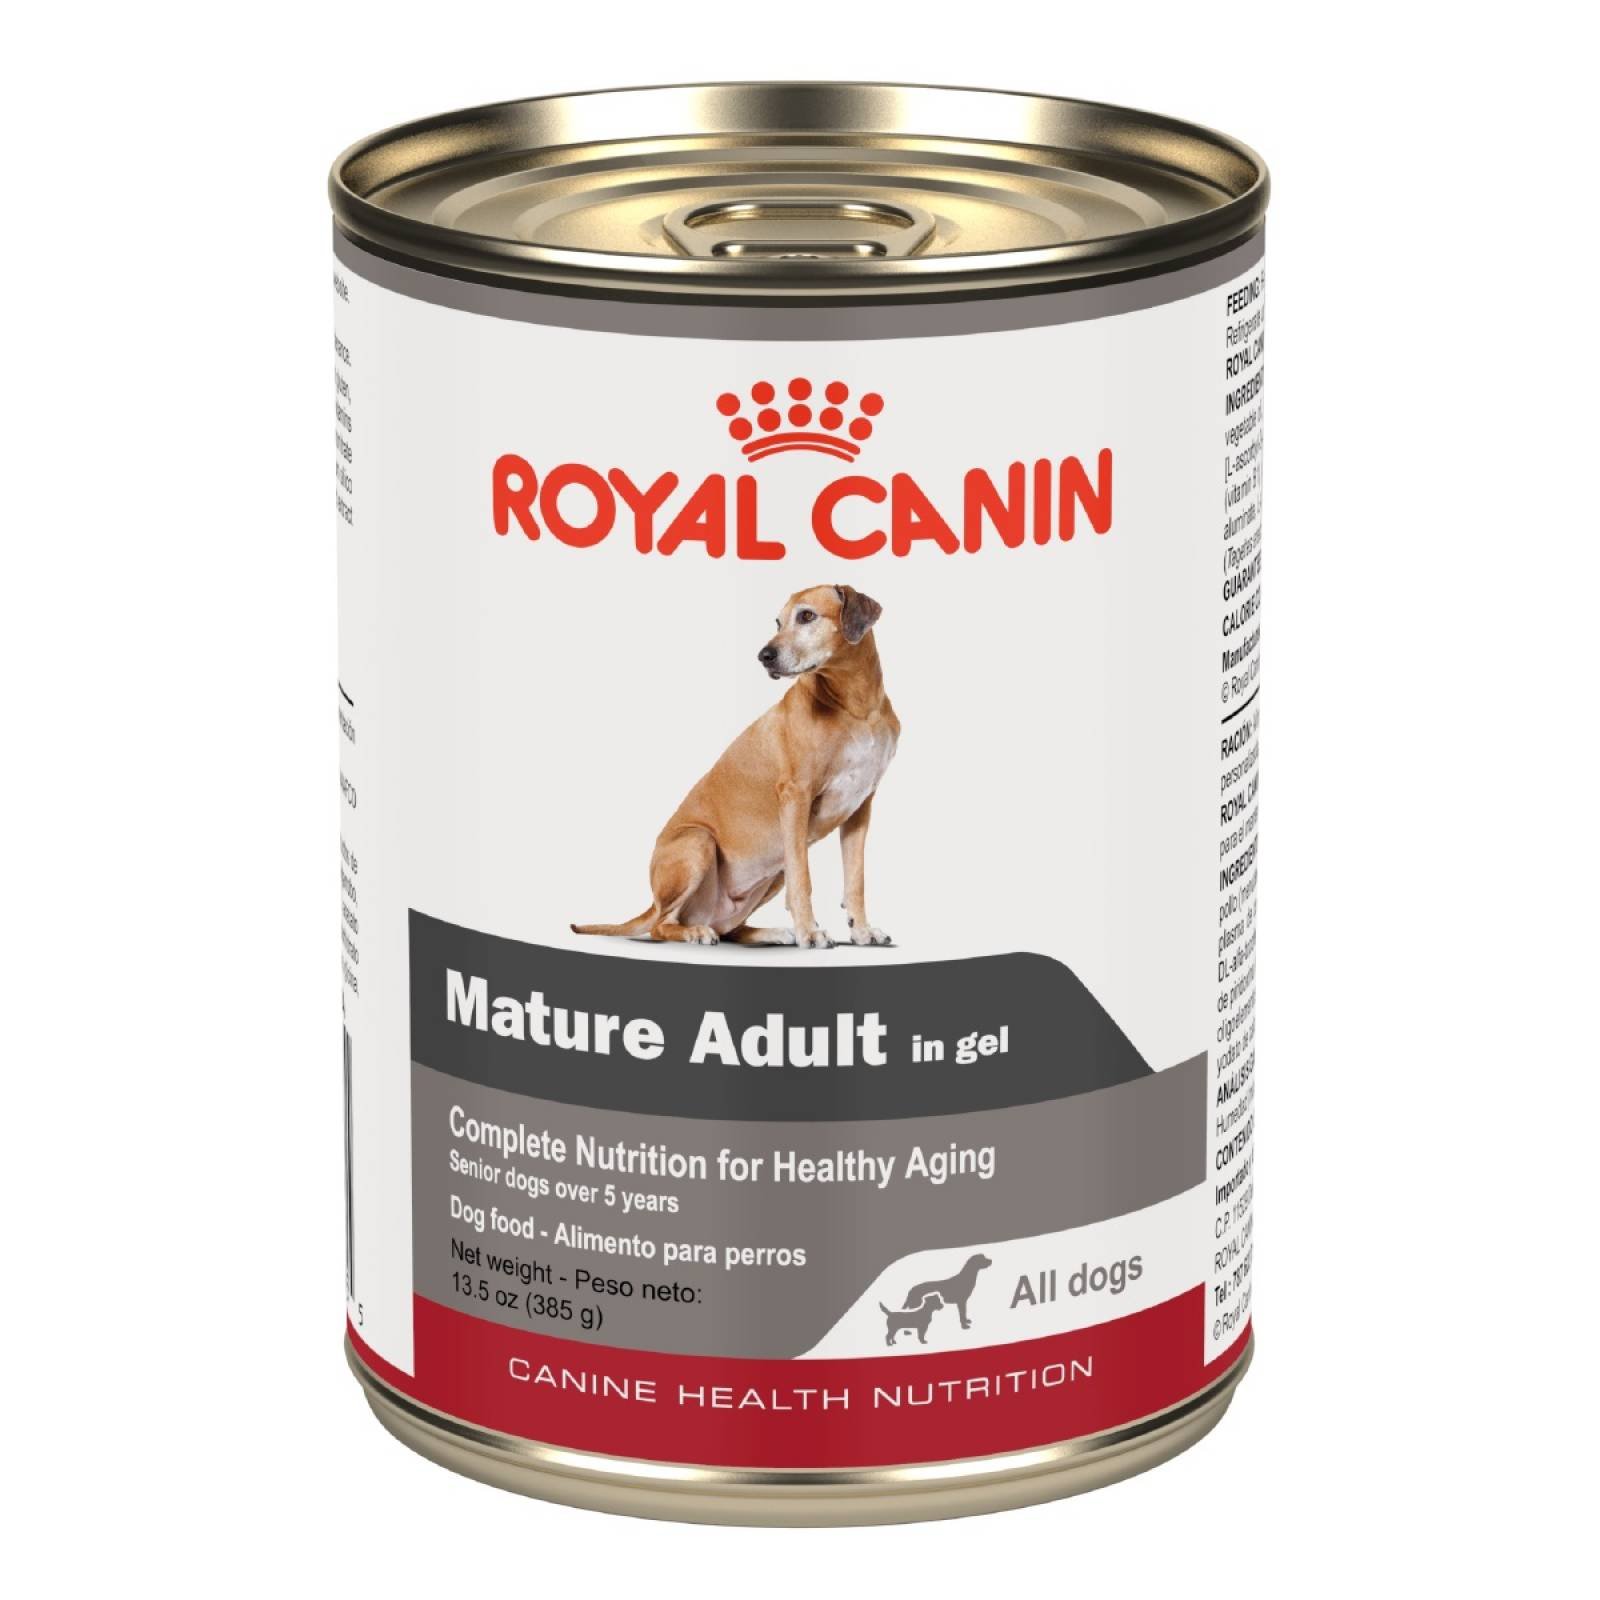 ROYAL CANIN LATA ALL DOGS MATURE ADULT 0.385gr (12 pzs)